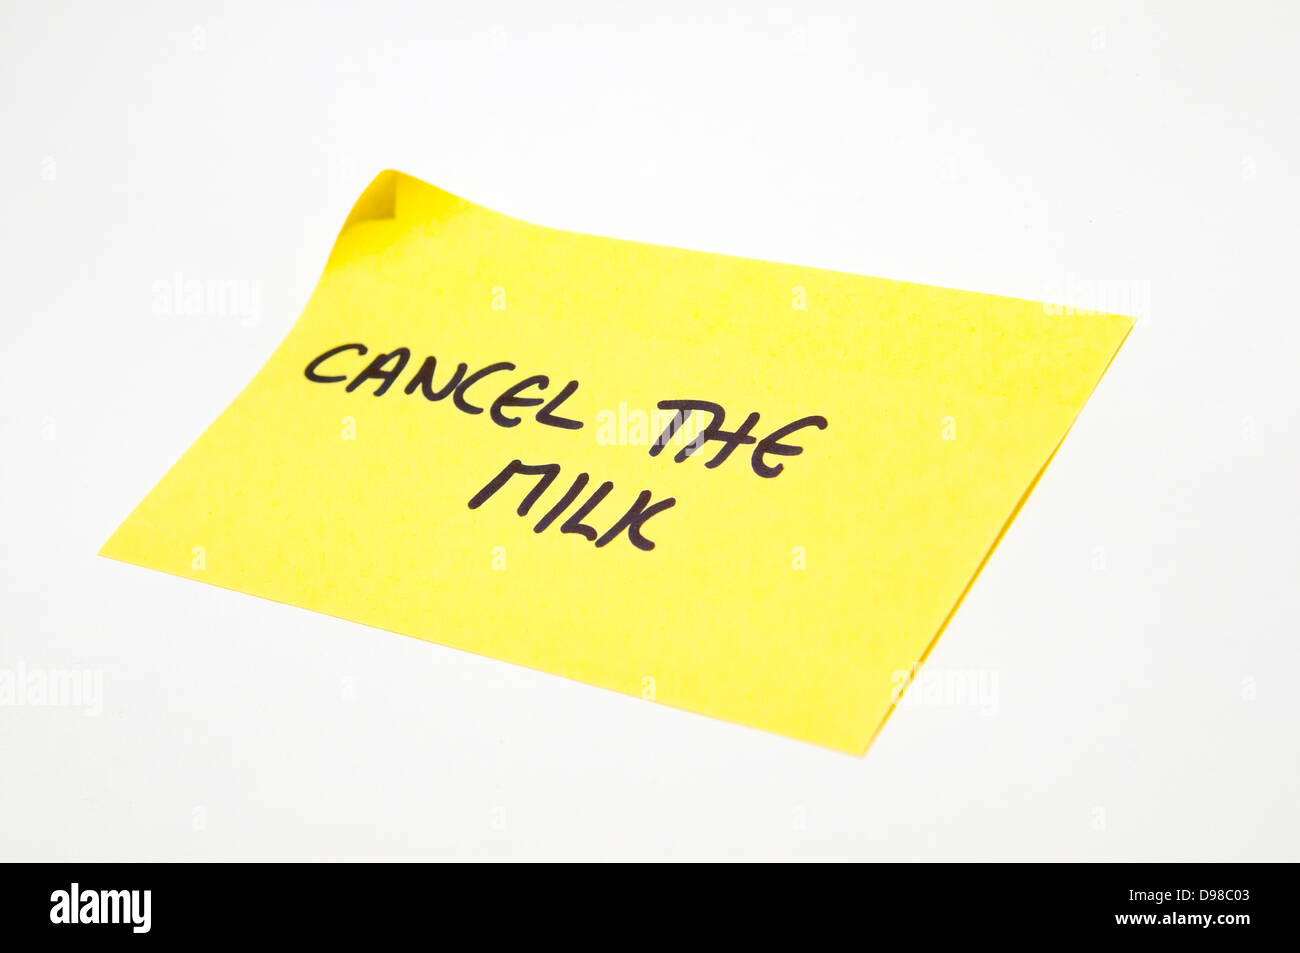 'Cancel the milk' written on a yellow post it note Stock Photo